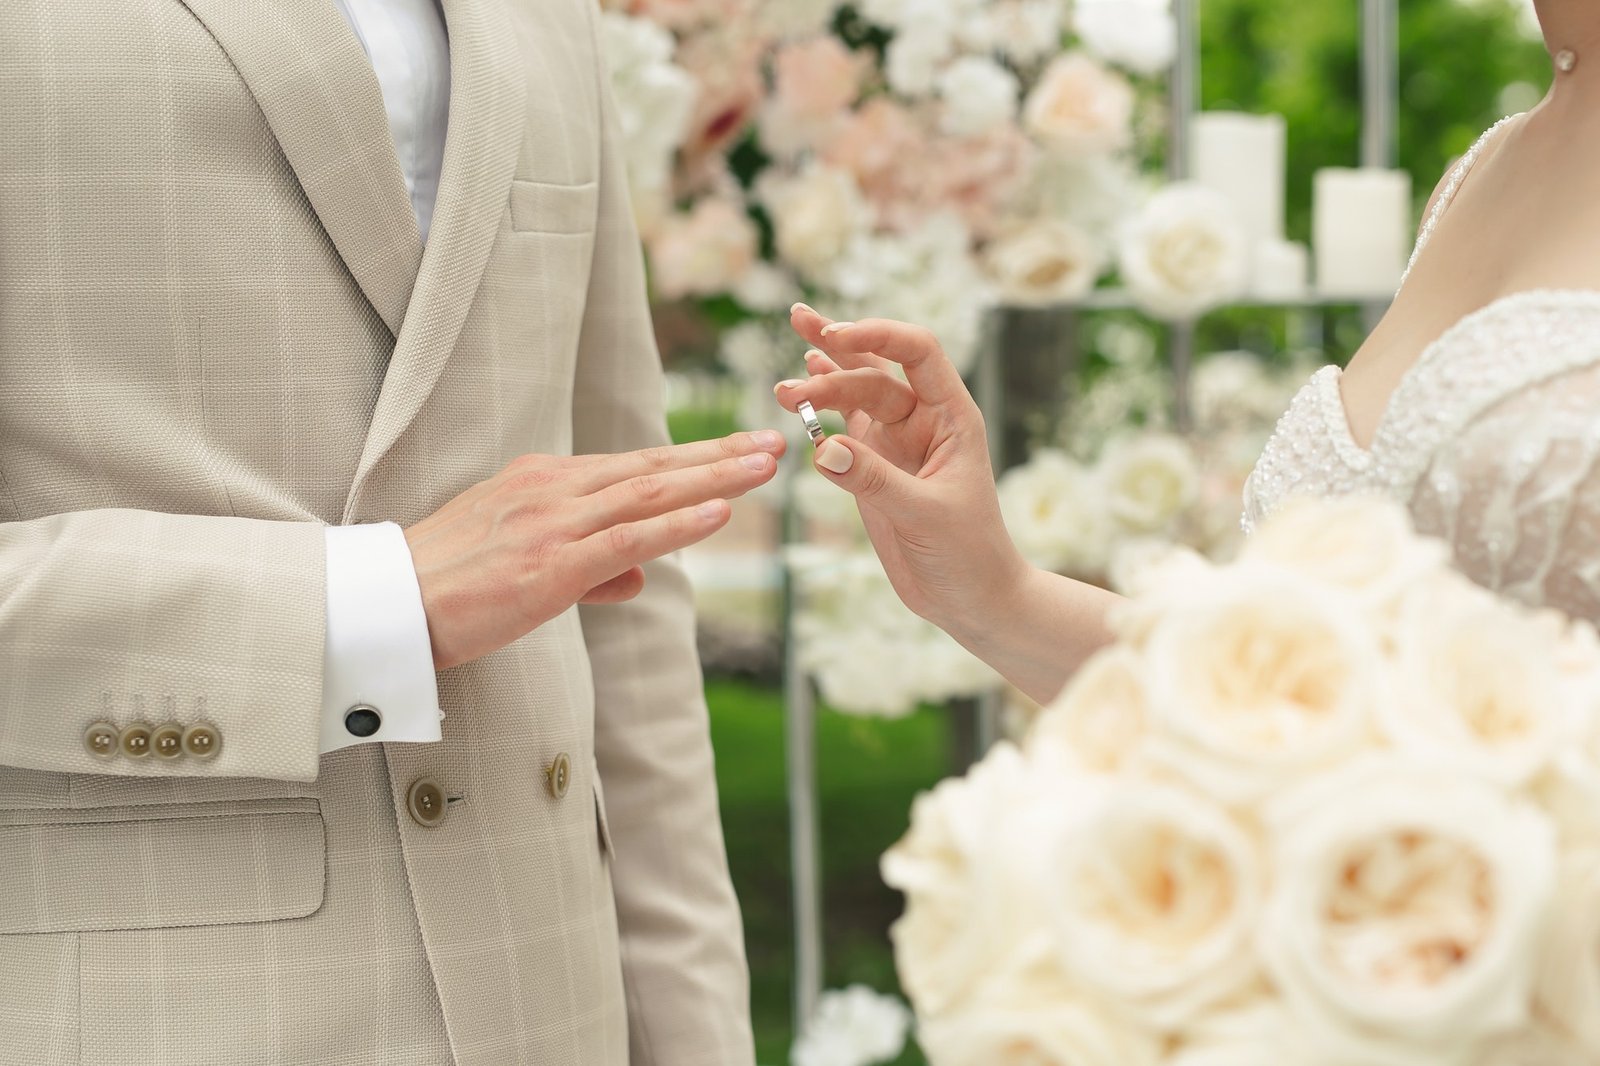 Wedding engagement rings. A married couple exchanges wedding rings at a wedding ceremony. The bride